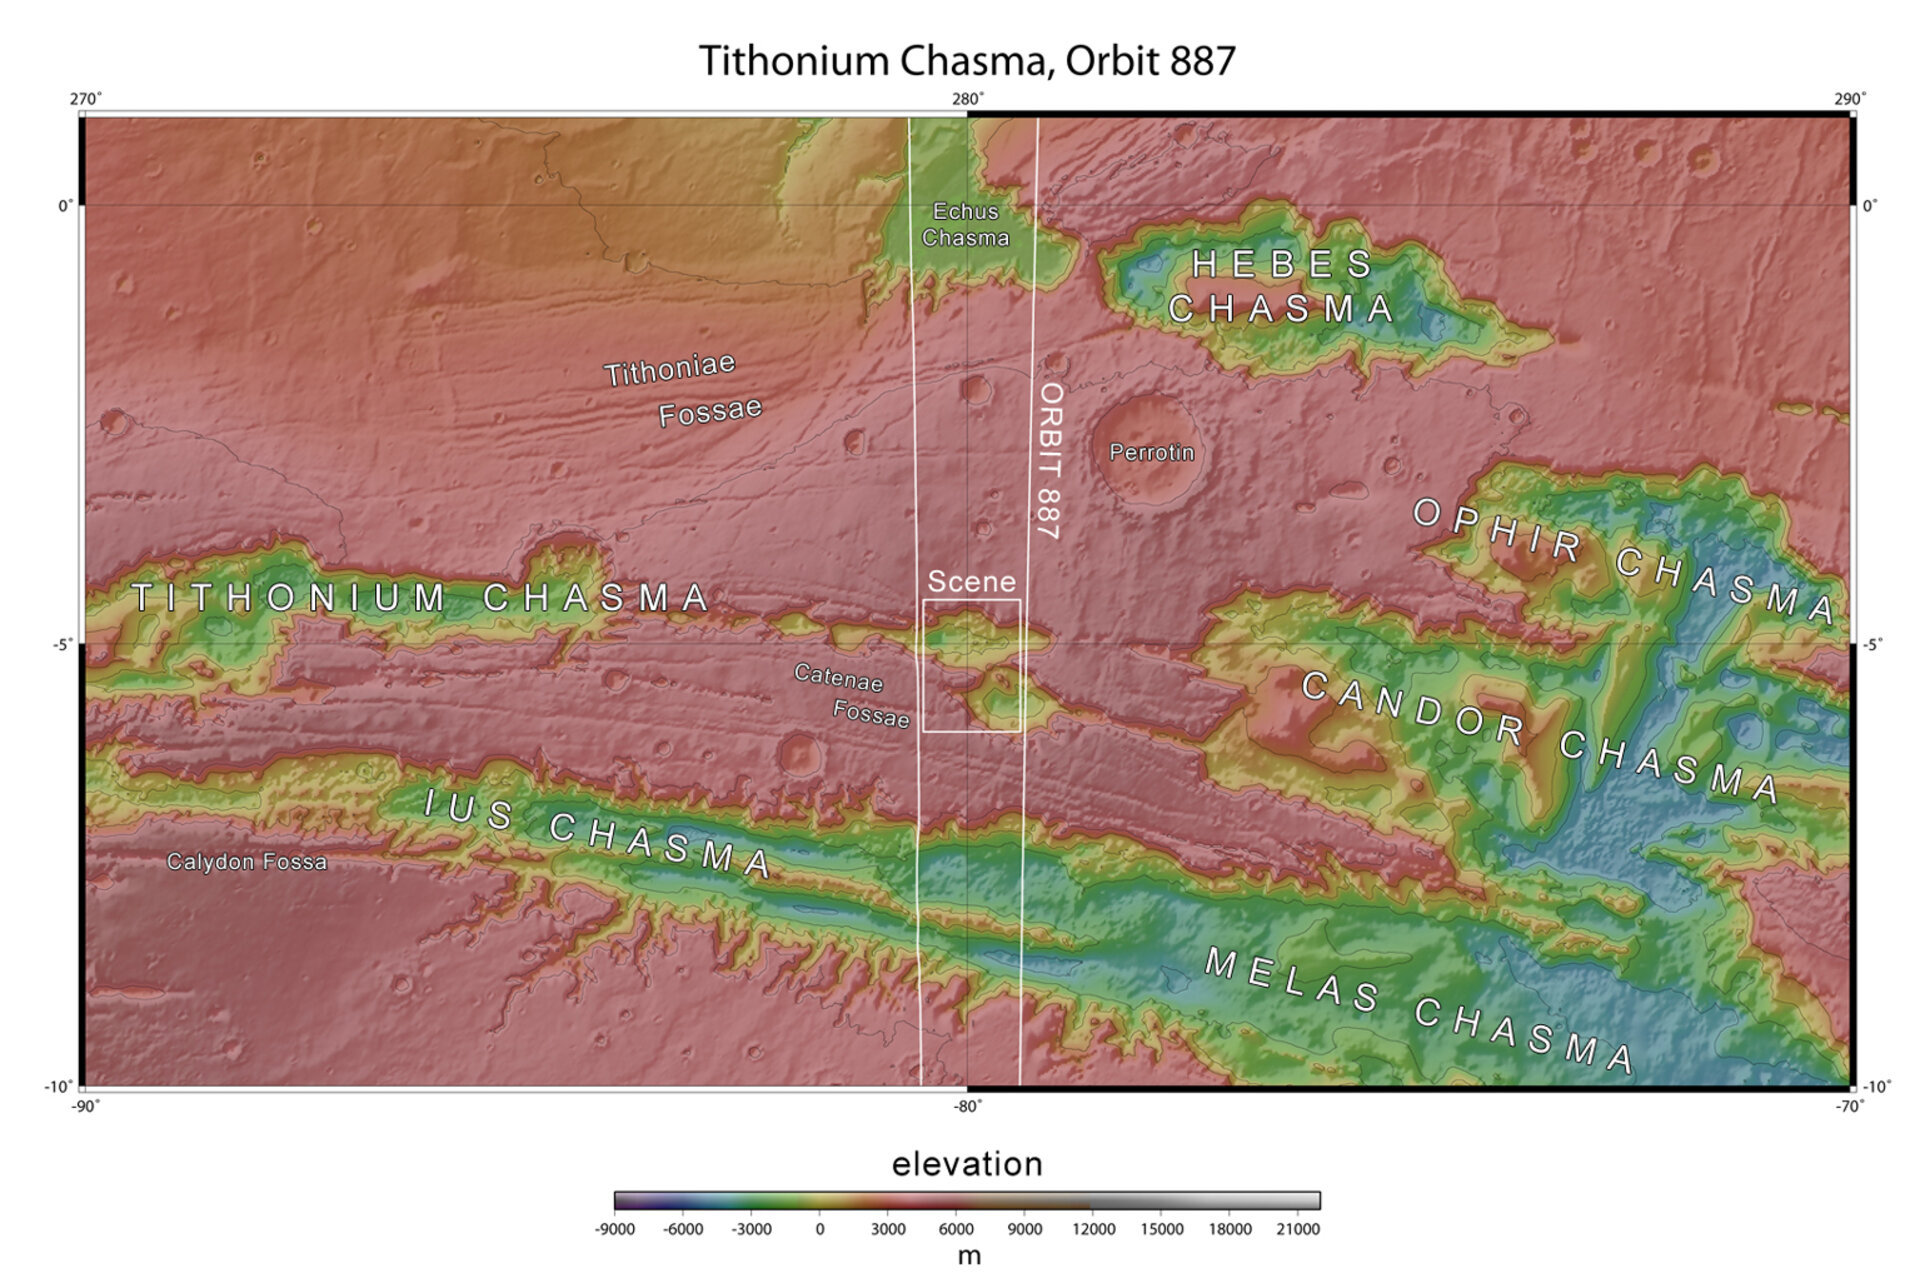 Section of Tithonium Chasma in context